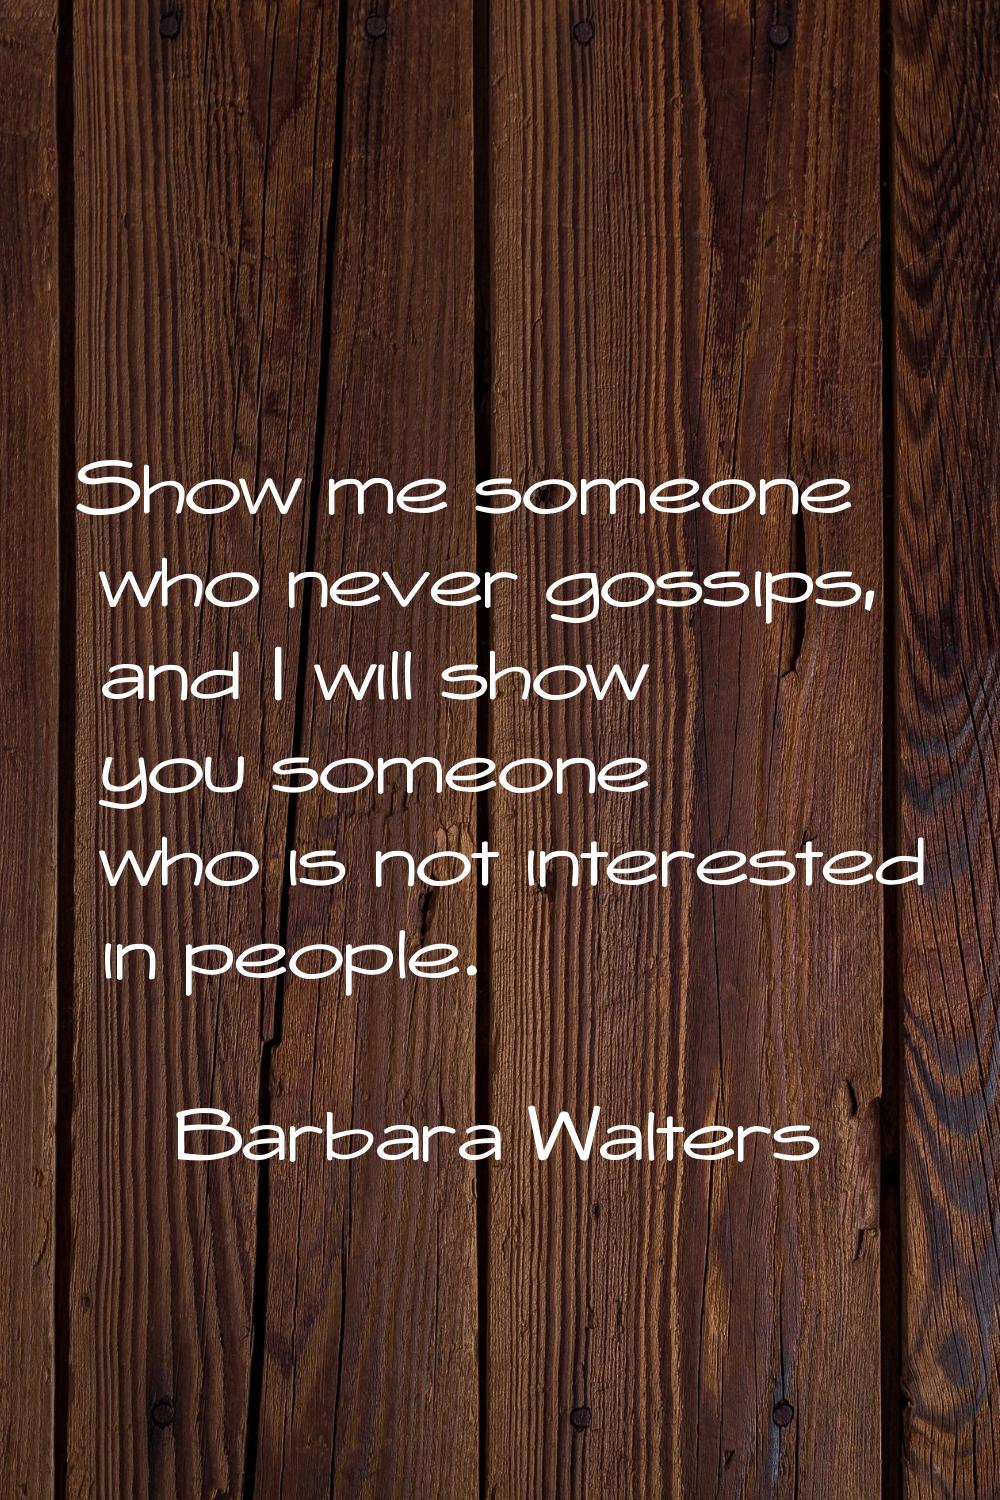 Show me someone who never gossips, and I will show you someone who is not interested in people.